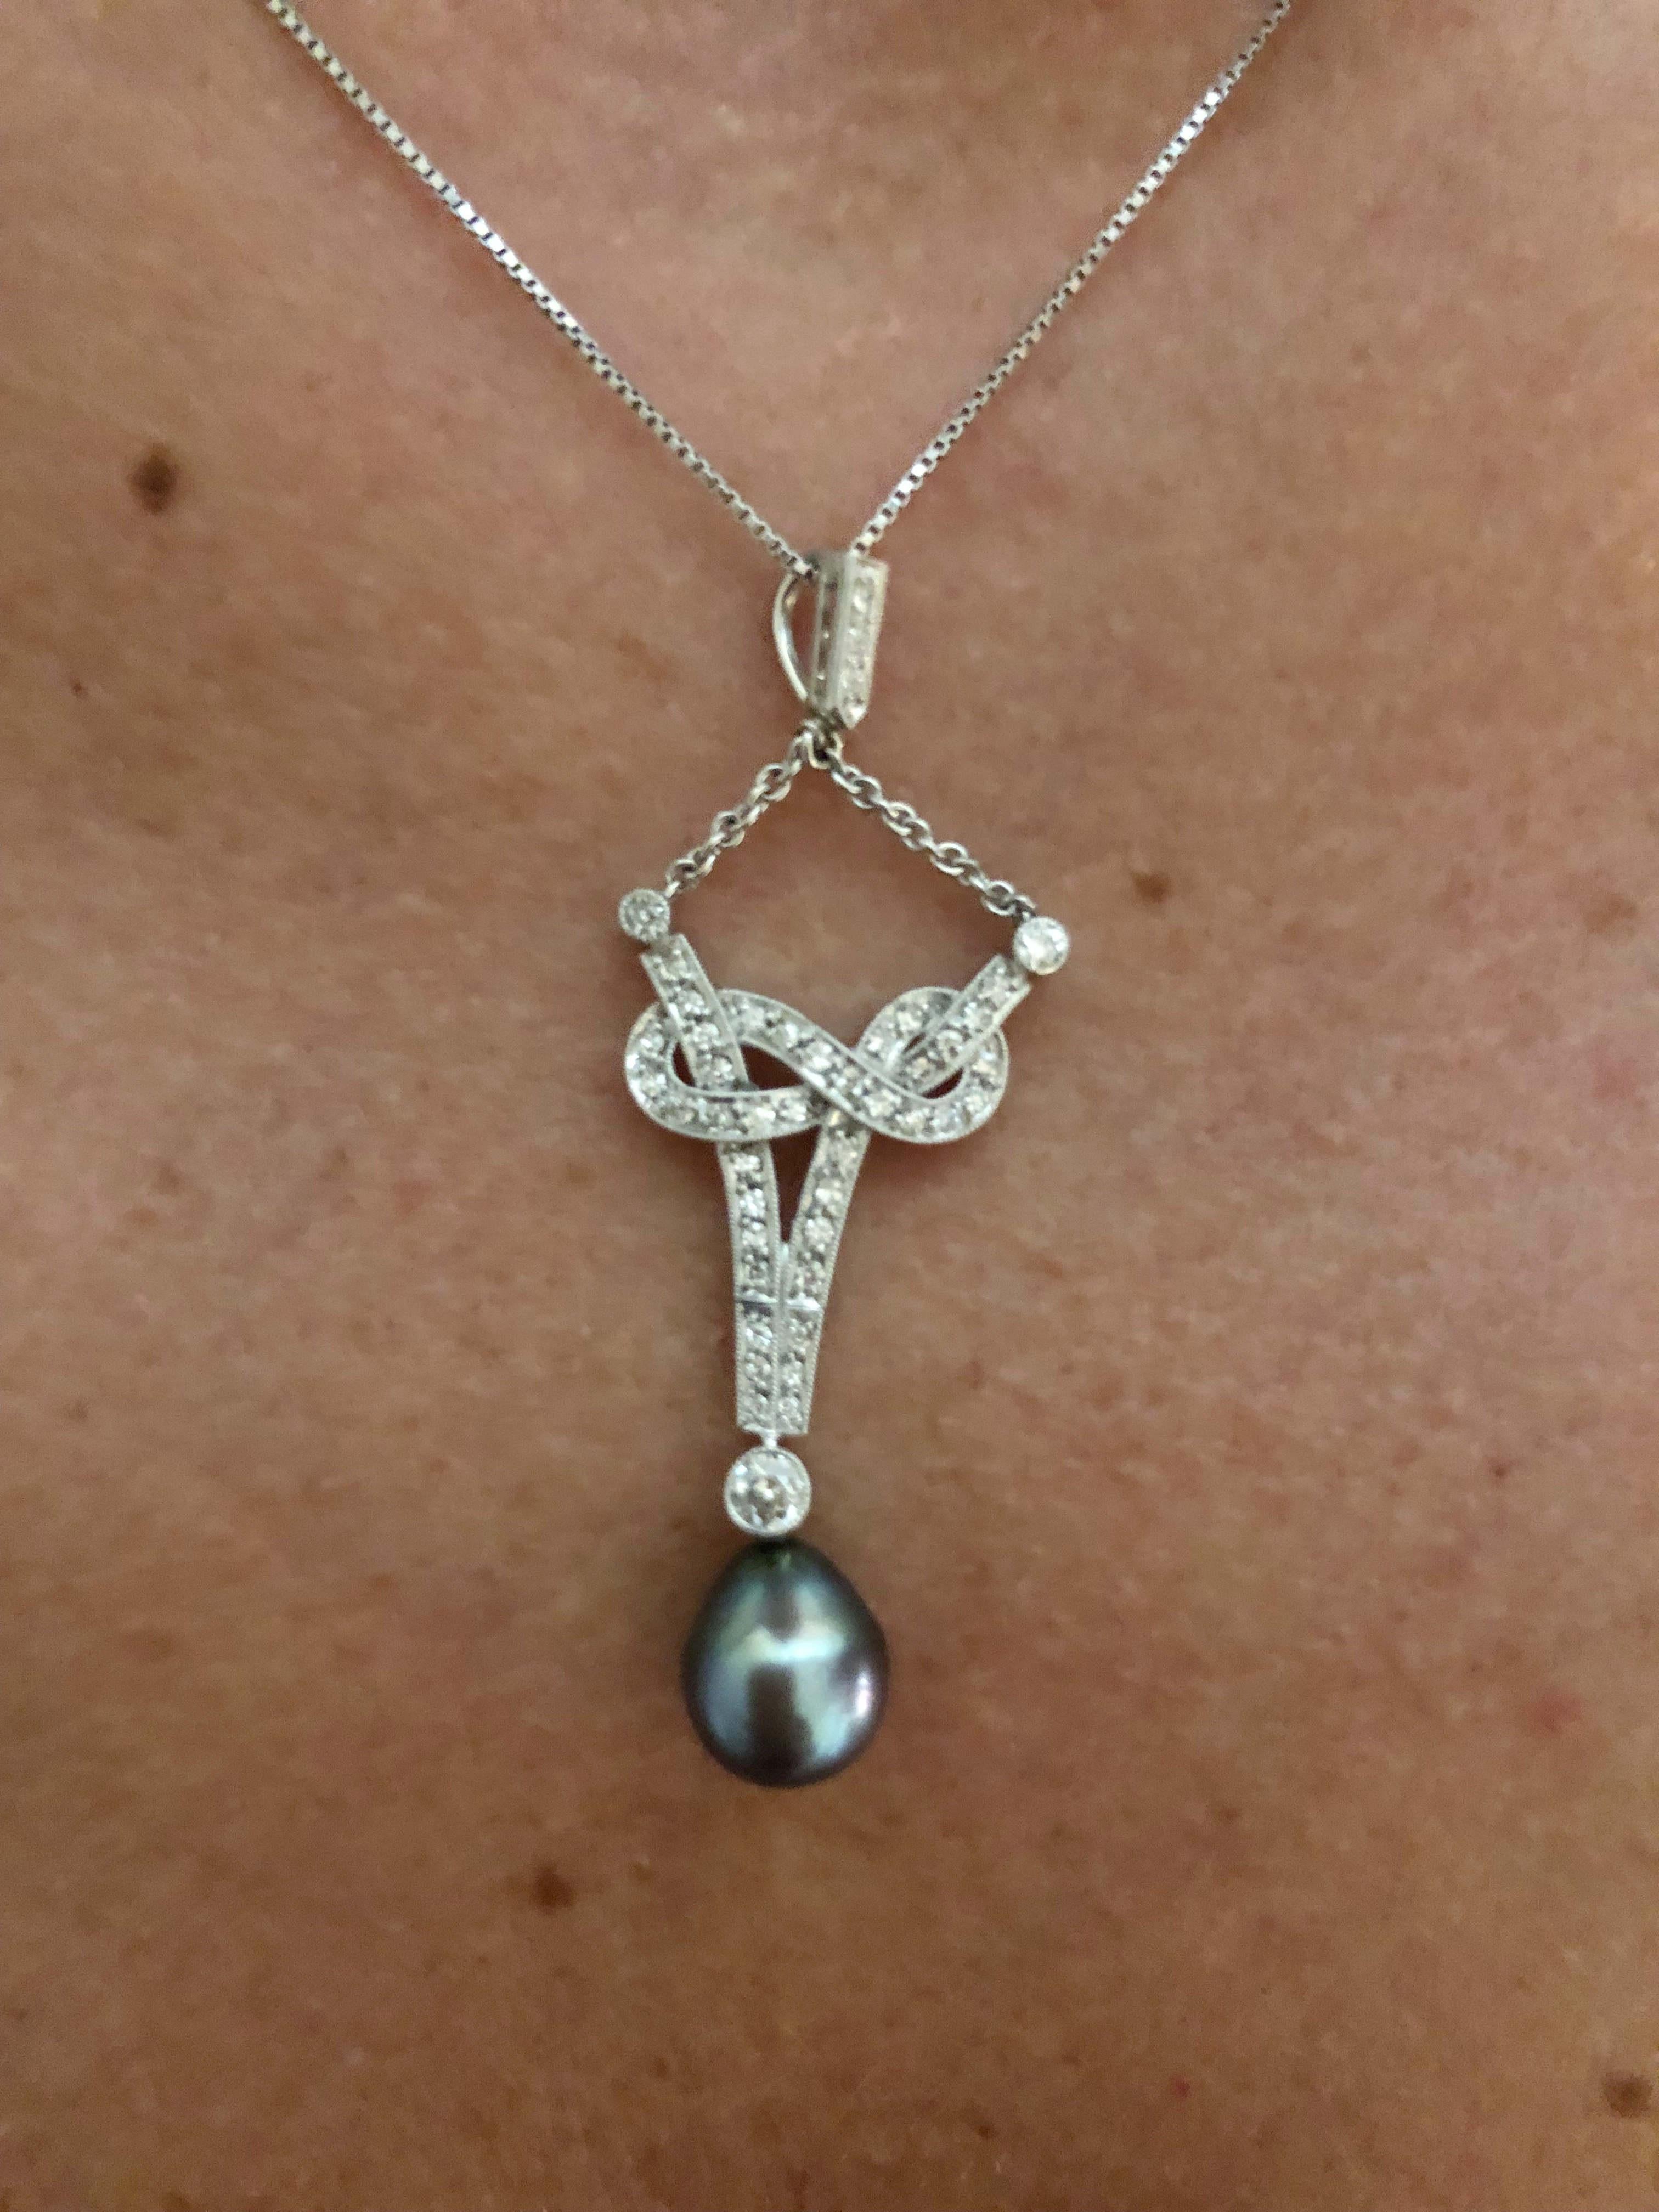 Vintage Italian 18 karat white gold love knot pendant with small diamonds and a gray pearl / Made in Italy 1930s